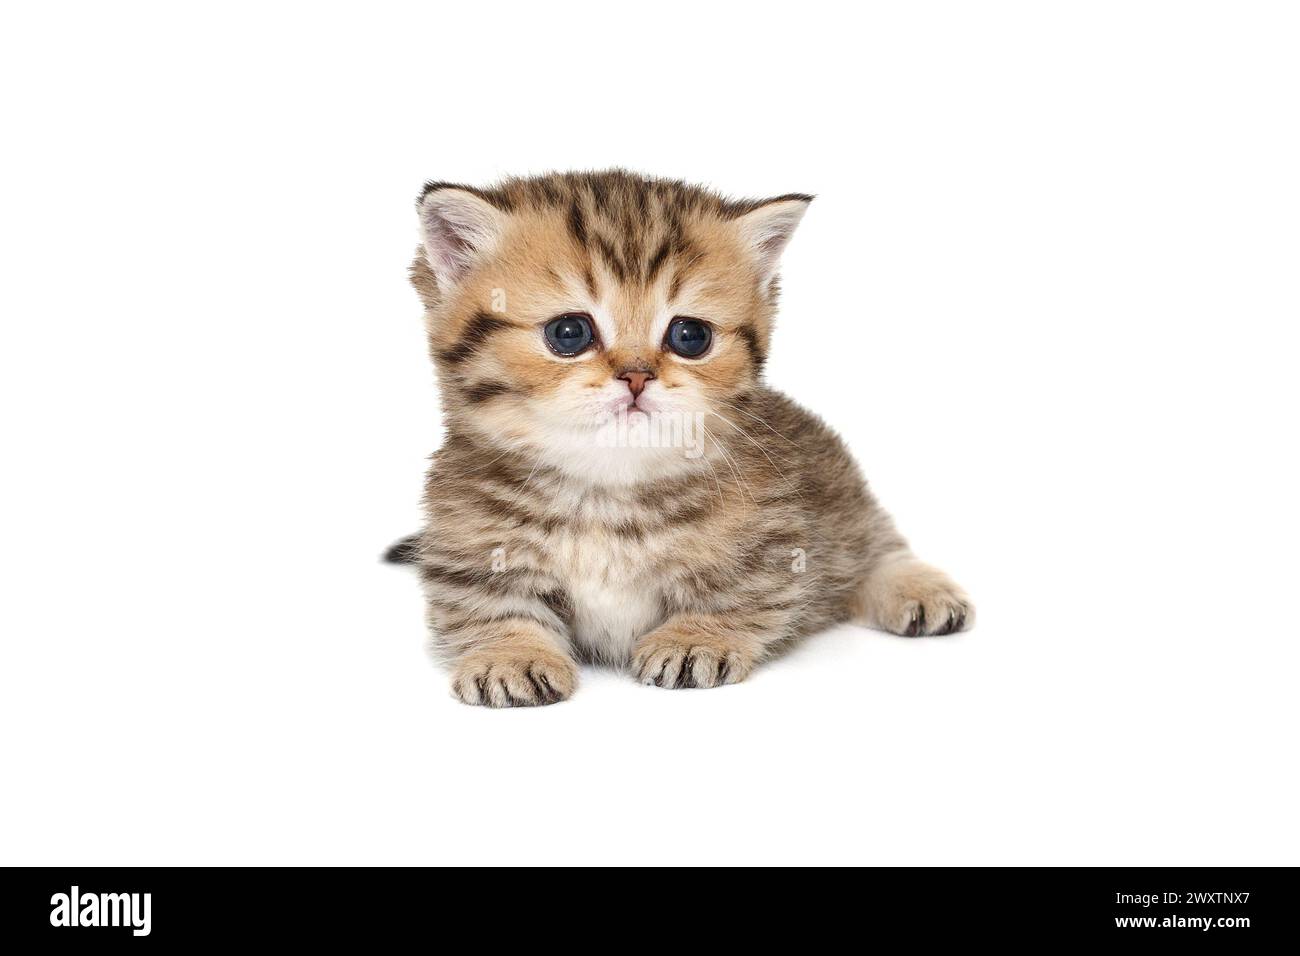 Small, striped Scottish kitten lies, isolated on a white background. Stock Photo